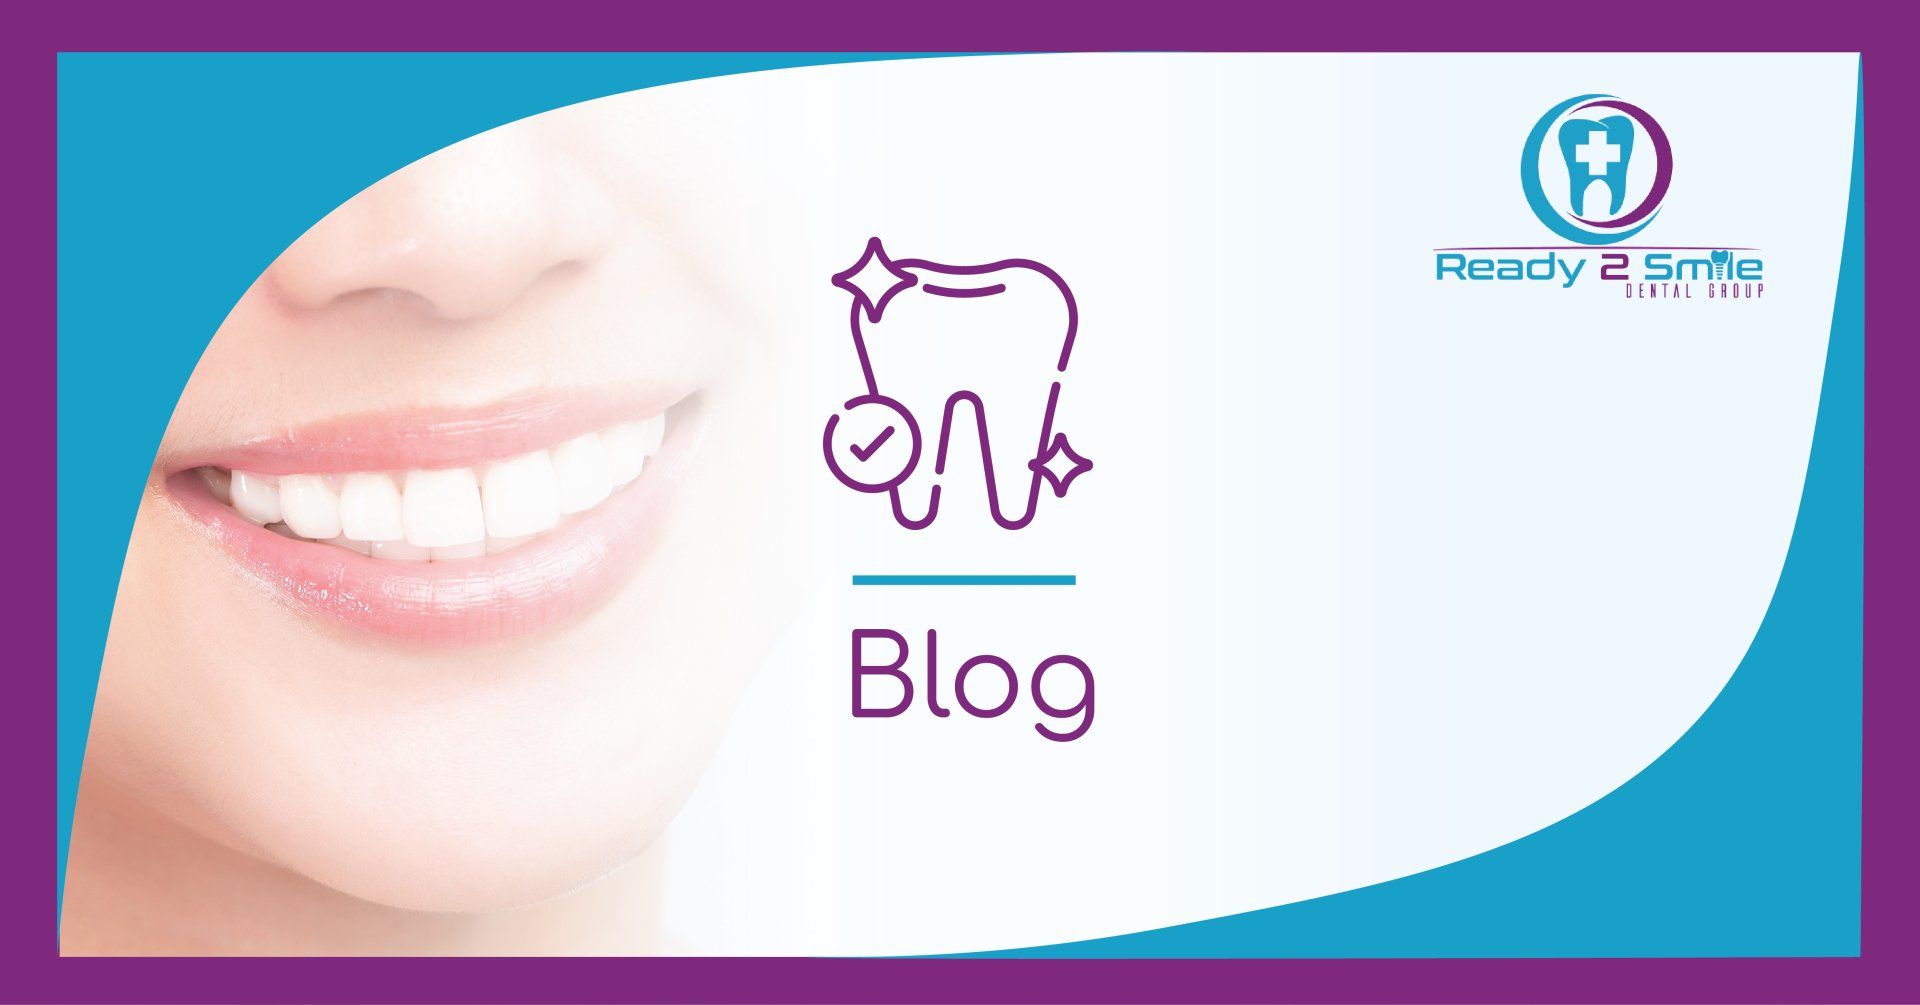 Improve Oral Health With Oral Surgery Procedures | Ready 2 Smile Dental Group